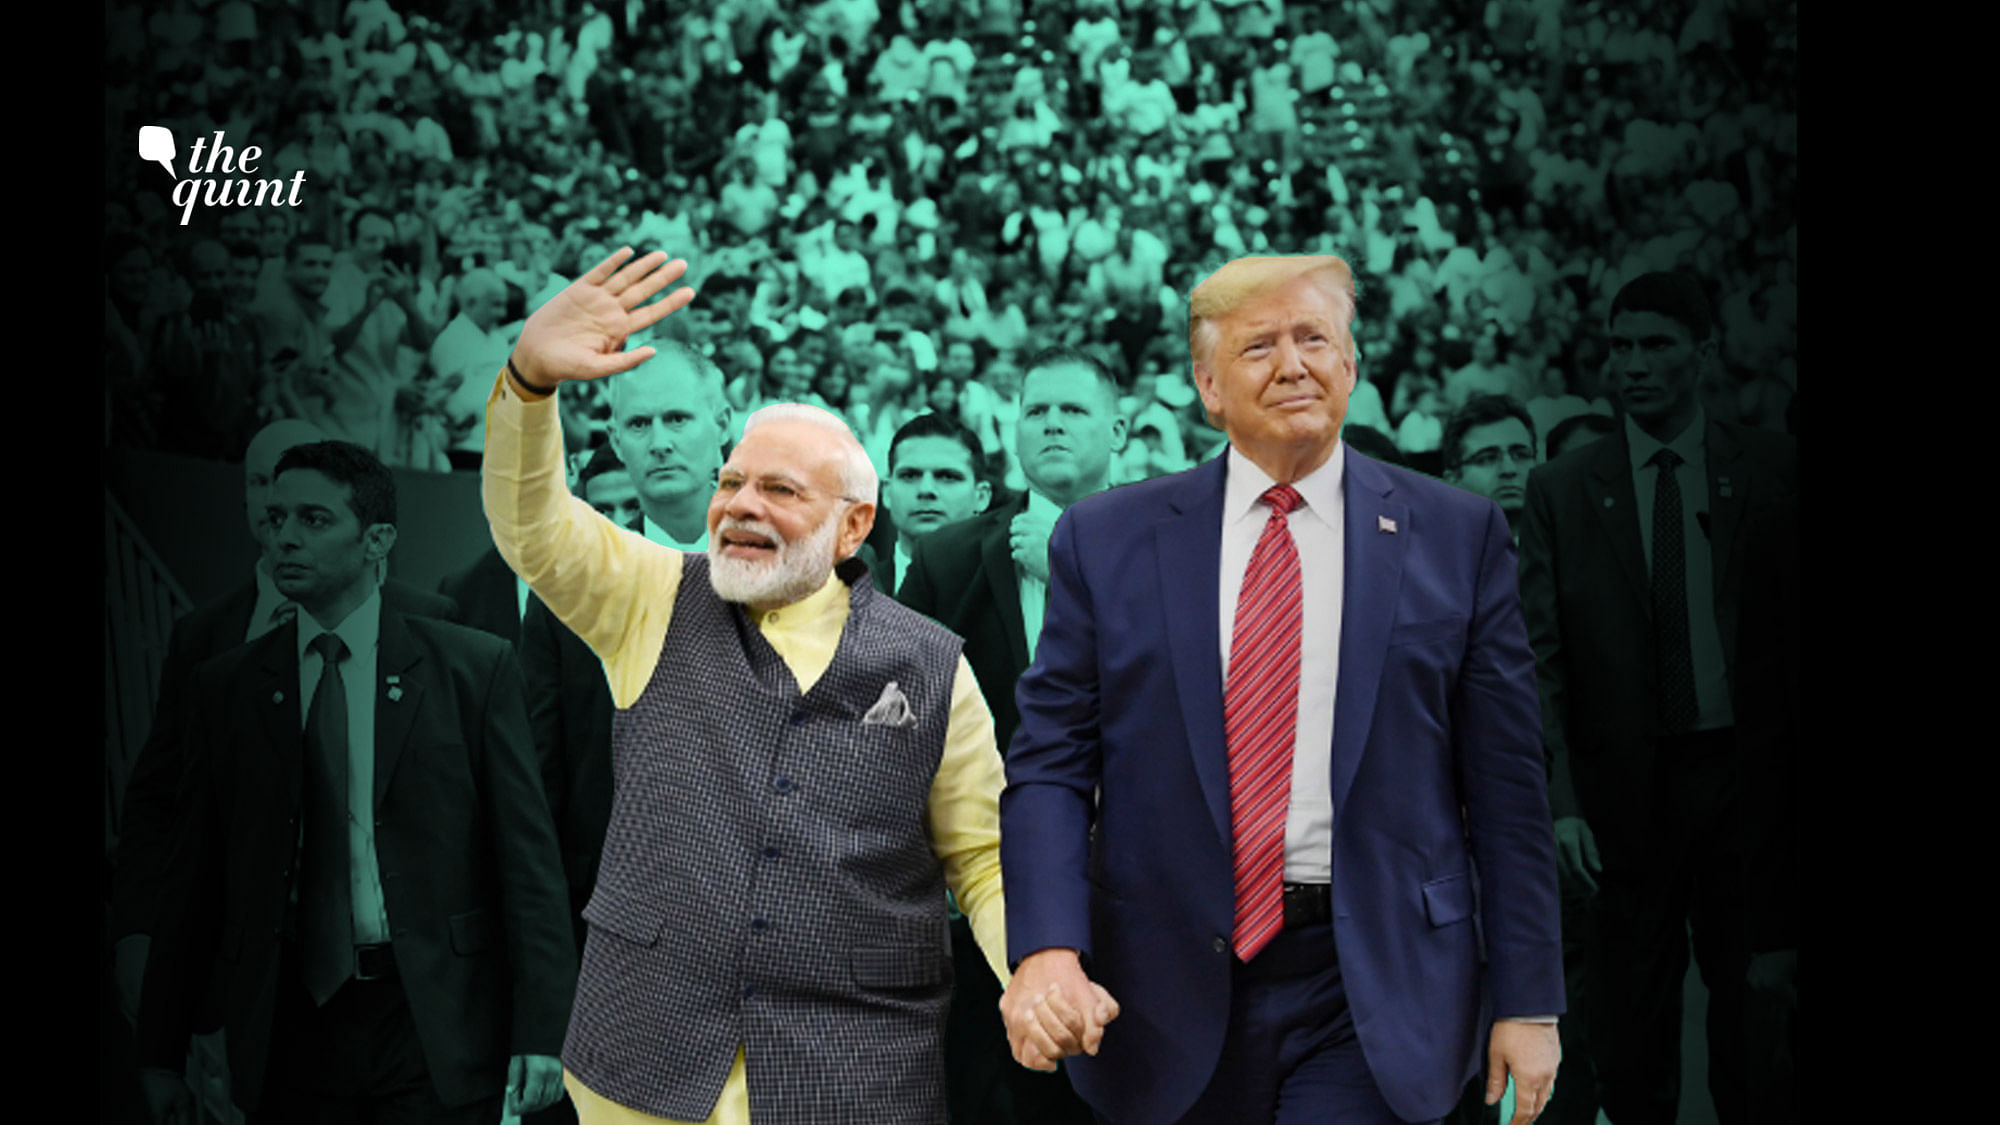 Image of PM Modi and President Trump, hand-in-hand at the Houston rally on 22 Sept 2019.